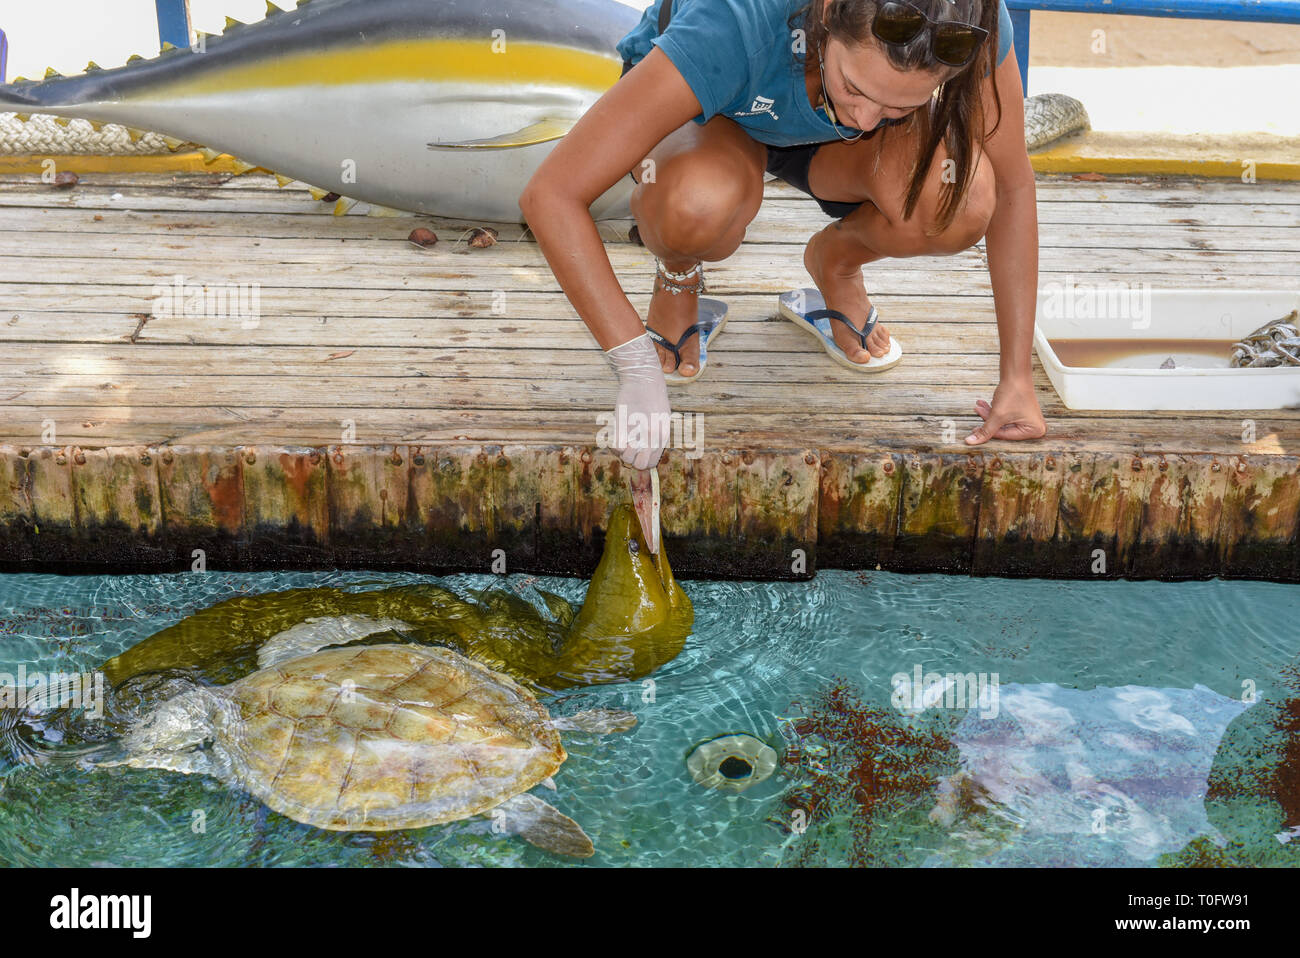 Praia do Forte, Brazil - 31 January 2019: woman who feeds moray and turtles on Project Tamar tank at Praia do Forte in Brazil Stock Photo